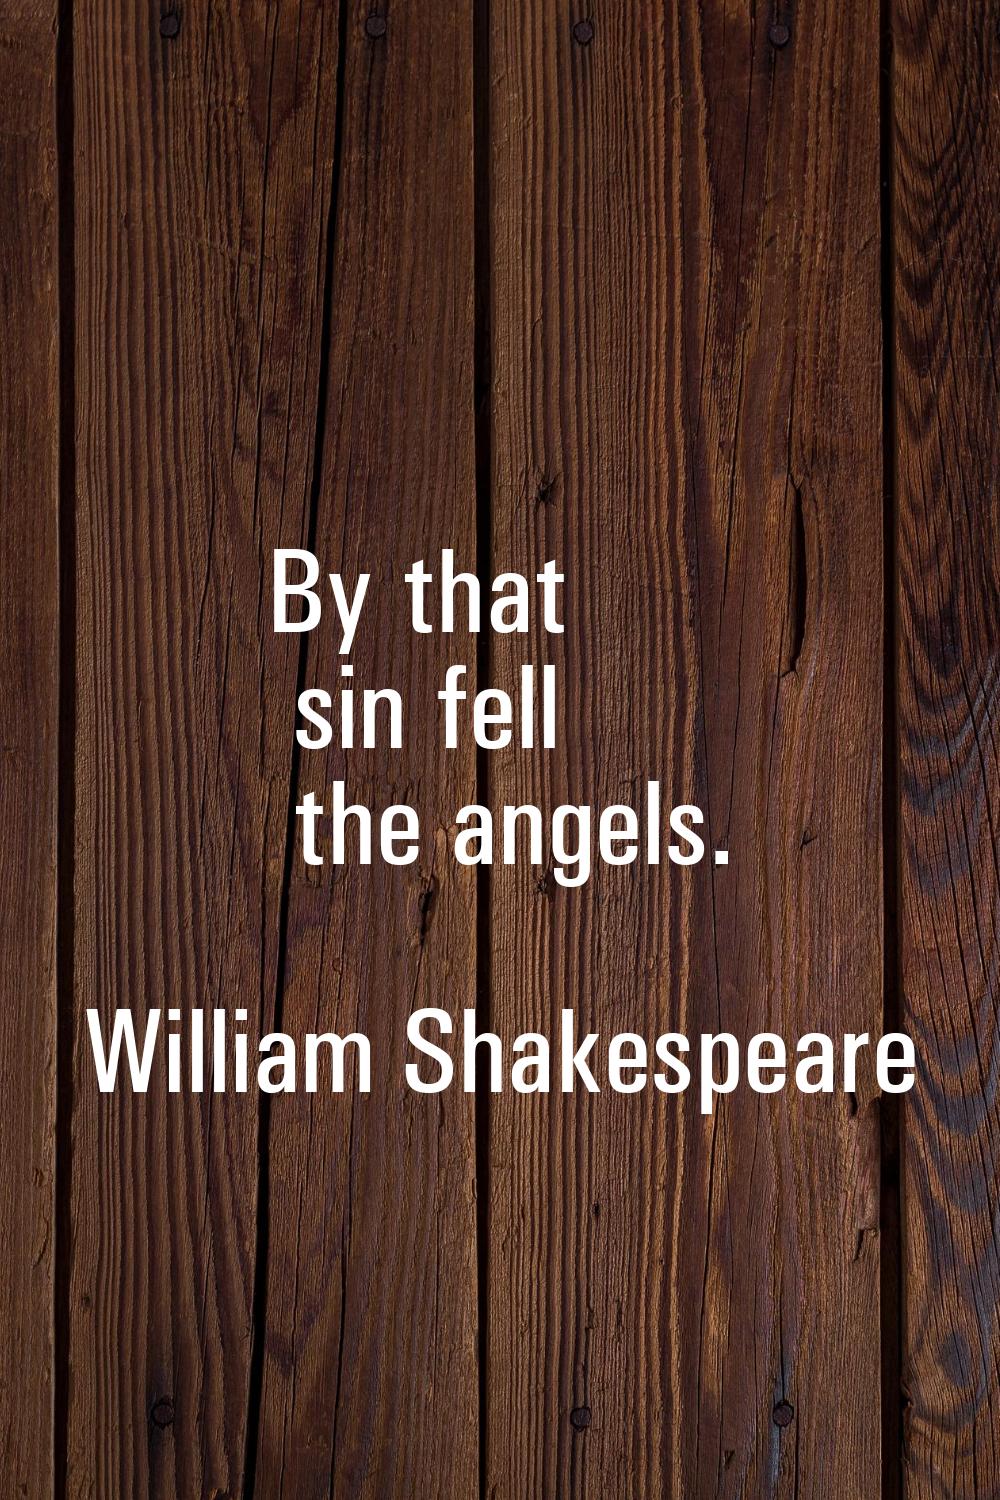 By that sin fell the angels.